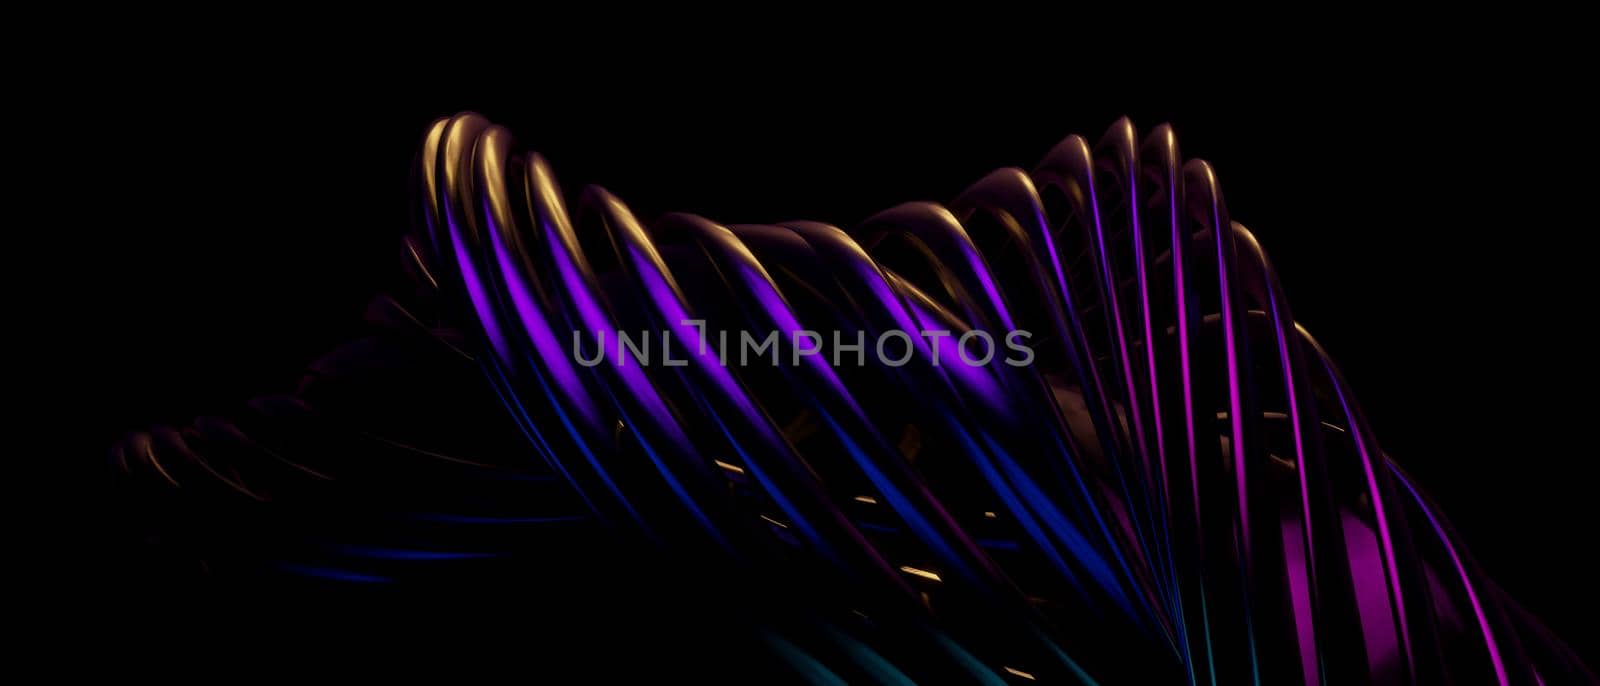 Magical Abstract 3d Neon Irridescent BluePurple Abstract Background 3D Illustration by yay_lmrb